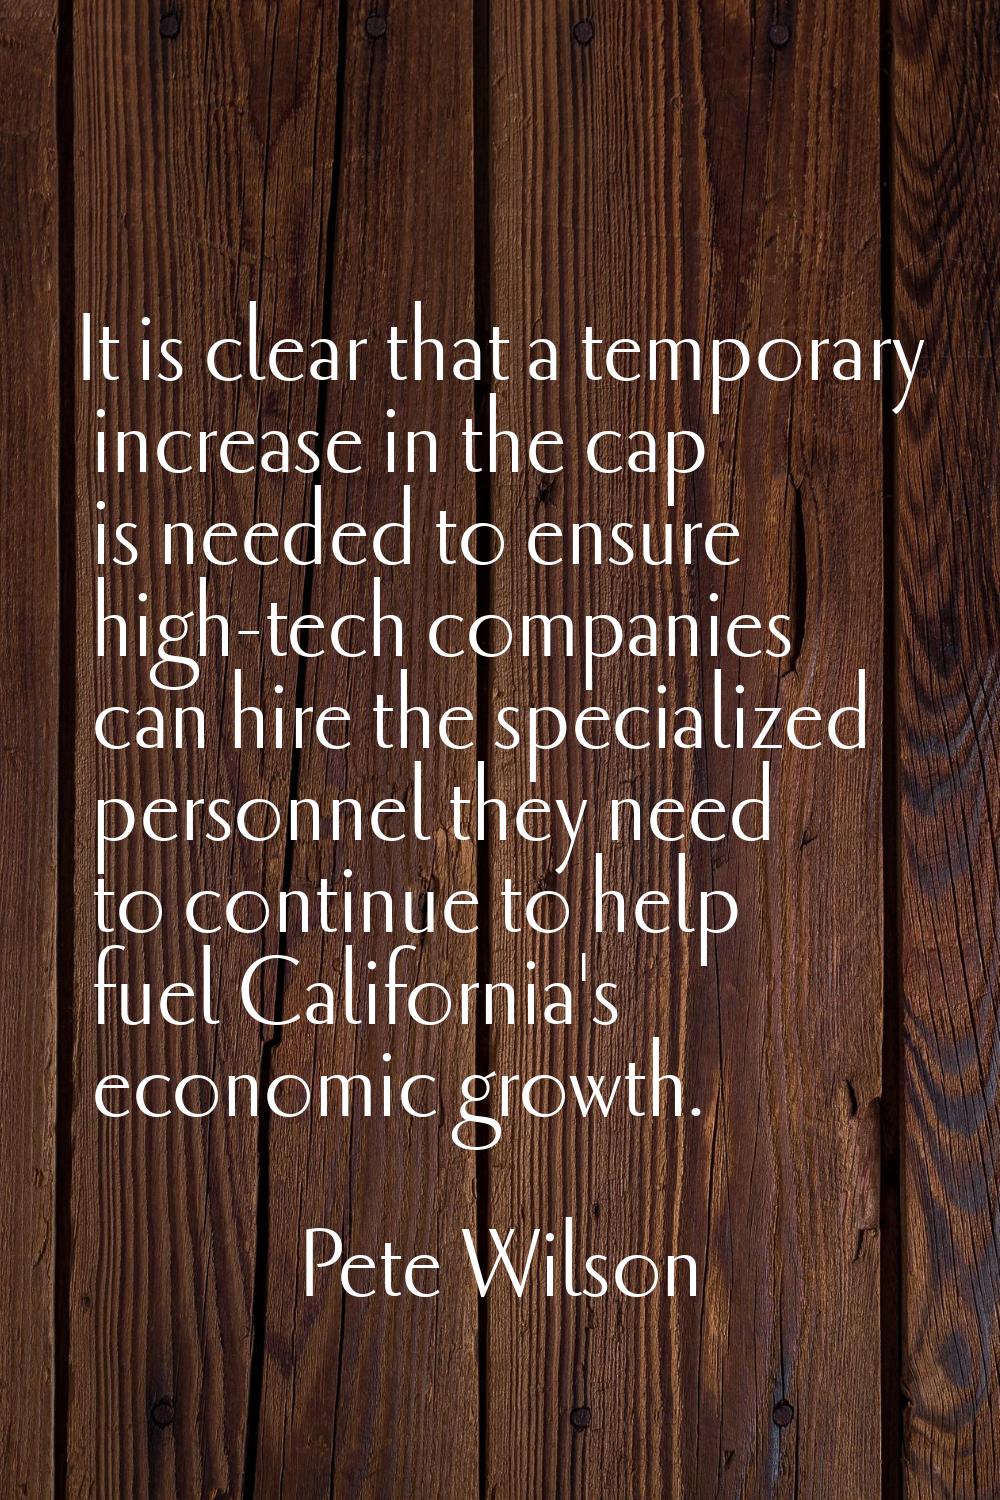 It is clear that a temporary increase in the cap is needed to ensure high-tech companies can hire t